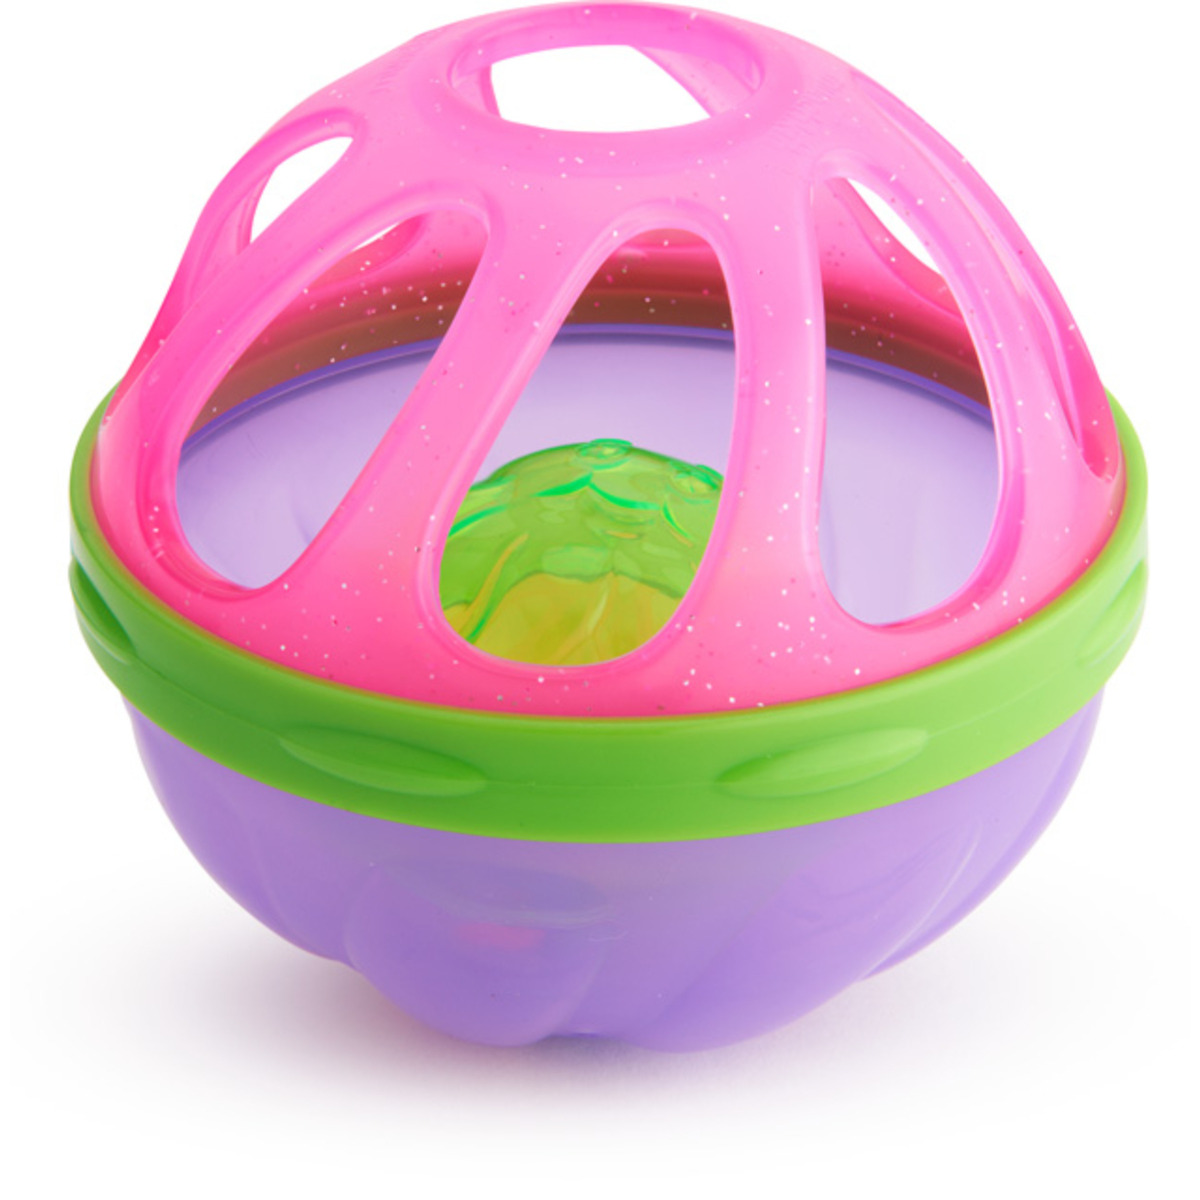 Munchkin Spill and Spin Bath Toy